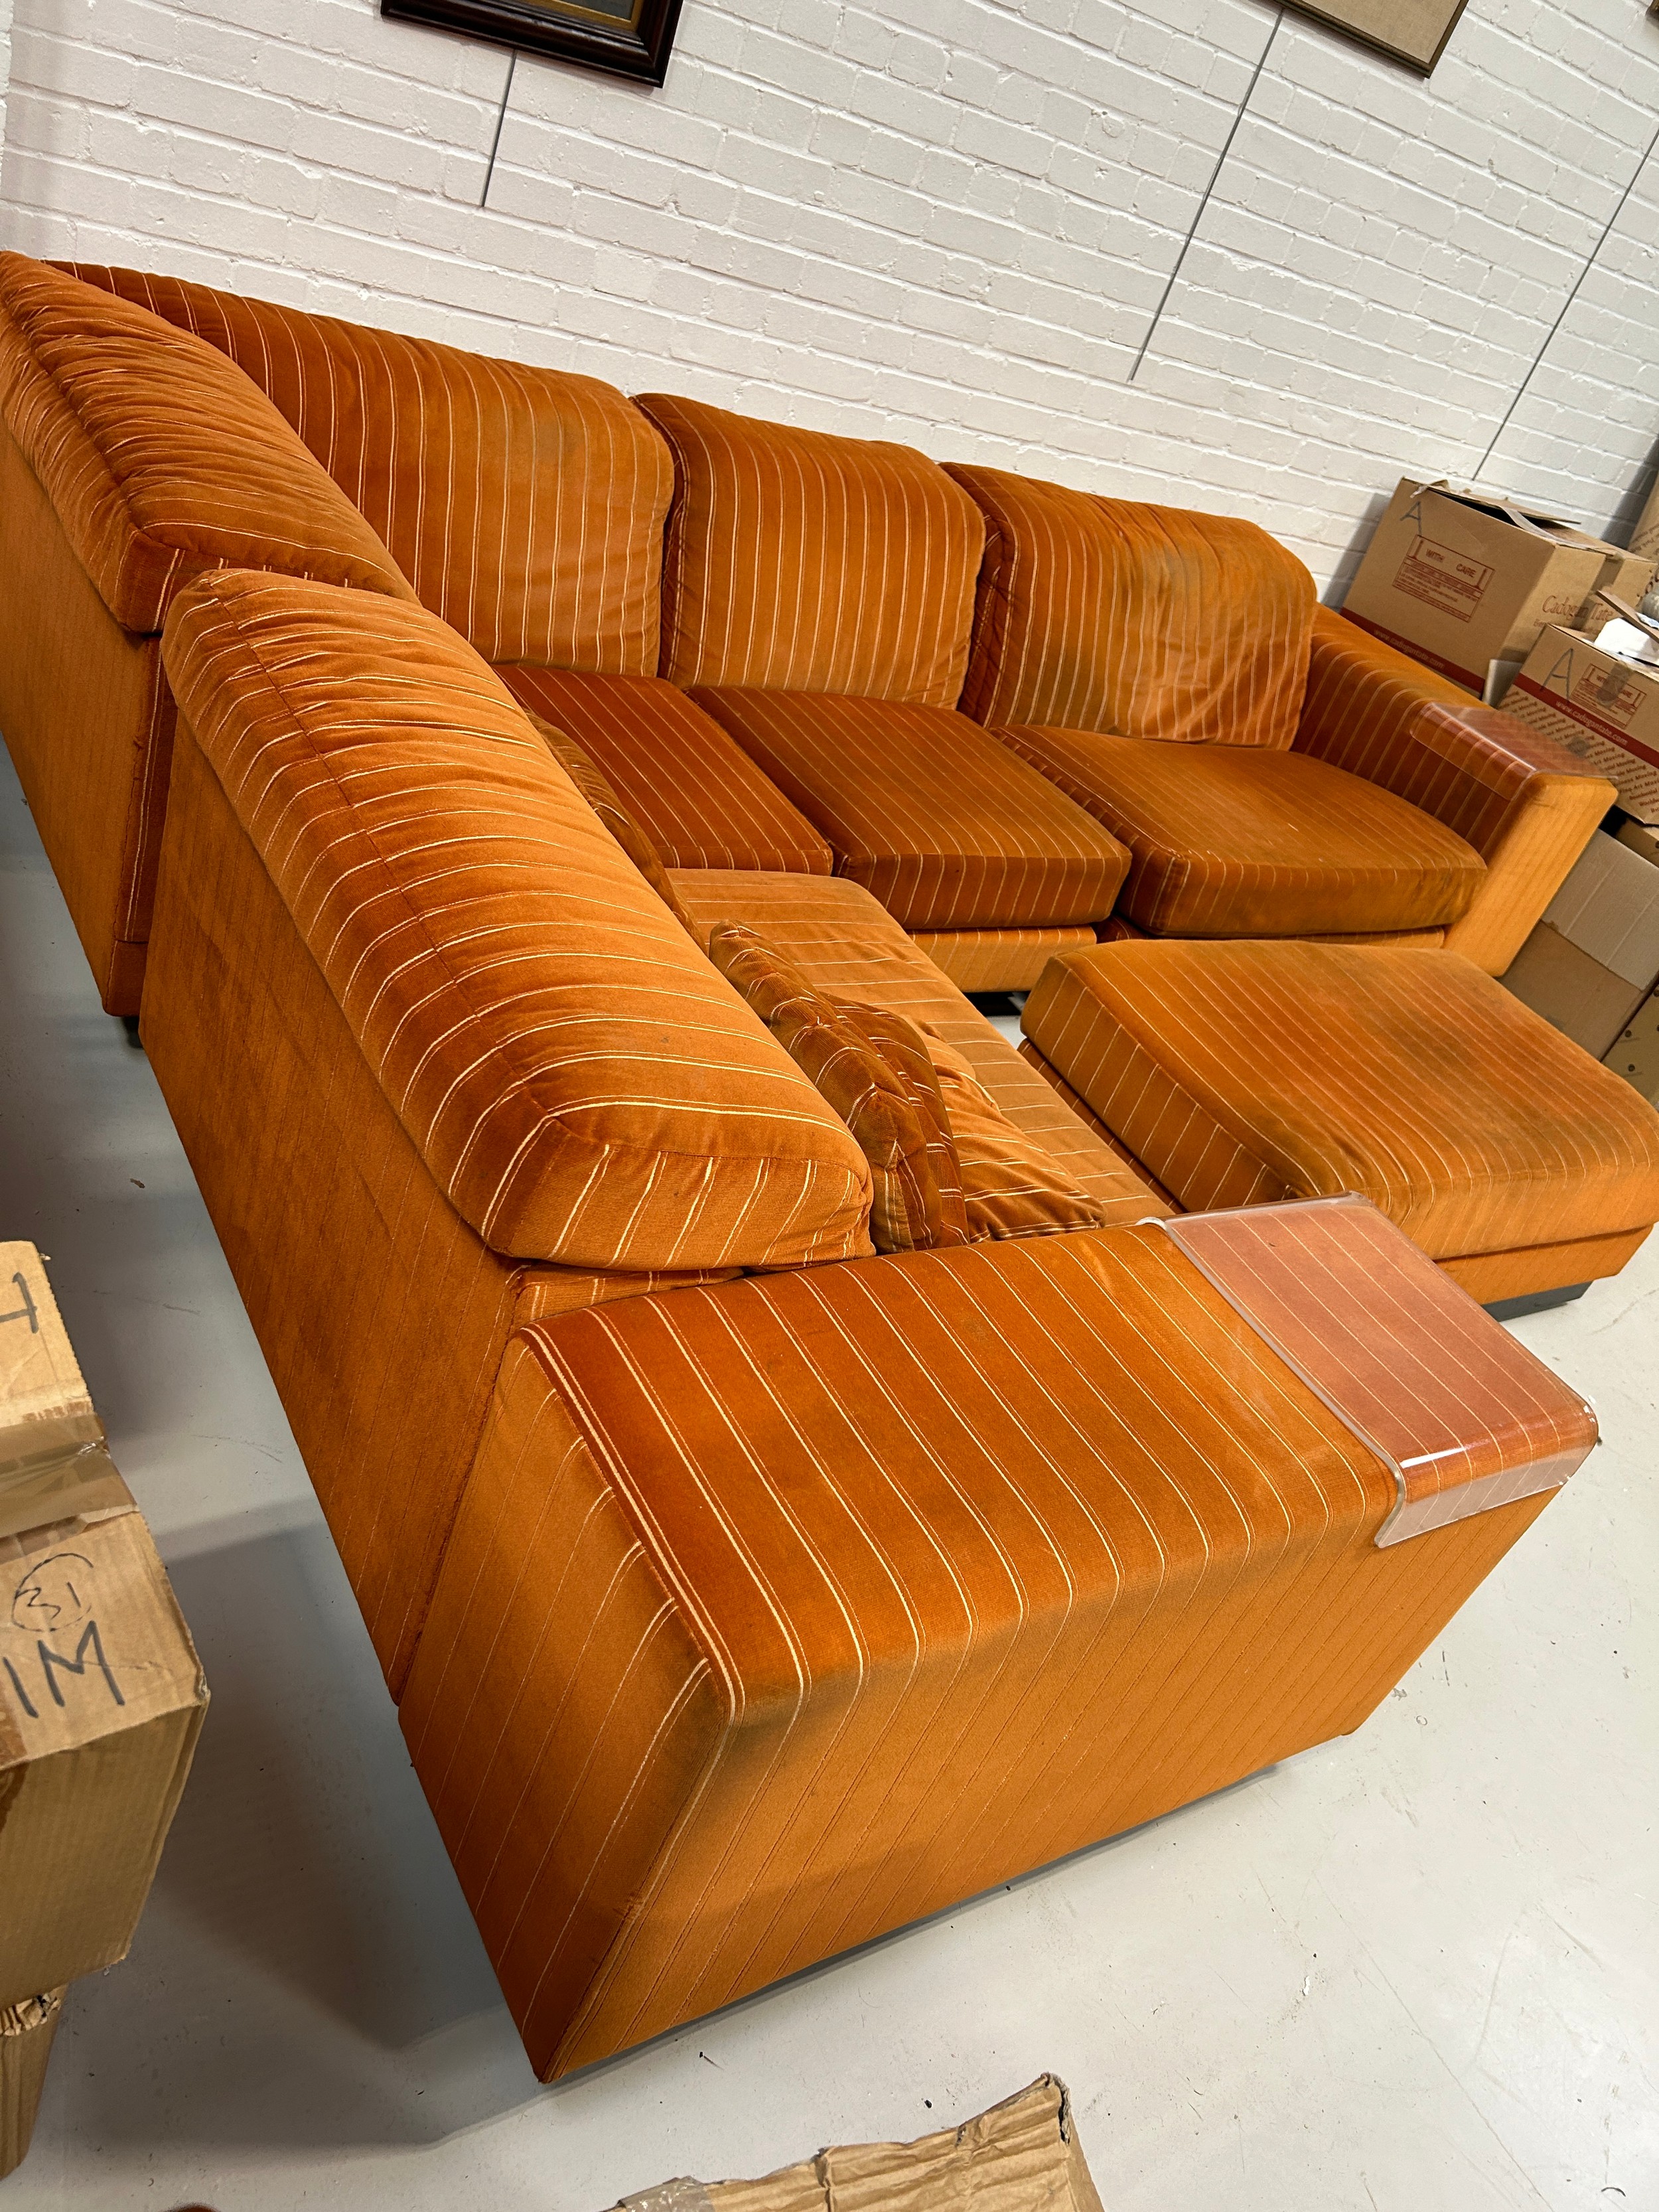 HOWARD KEITH: A LARGE SECTIONAL CORNER SOFA UPHOLSTERED IN STRIPED BURNT ORANGE FABRIC, 300cm x - Image 3 of 5